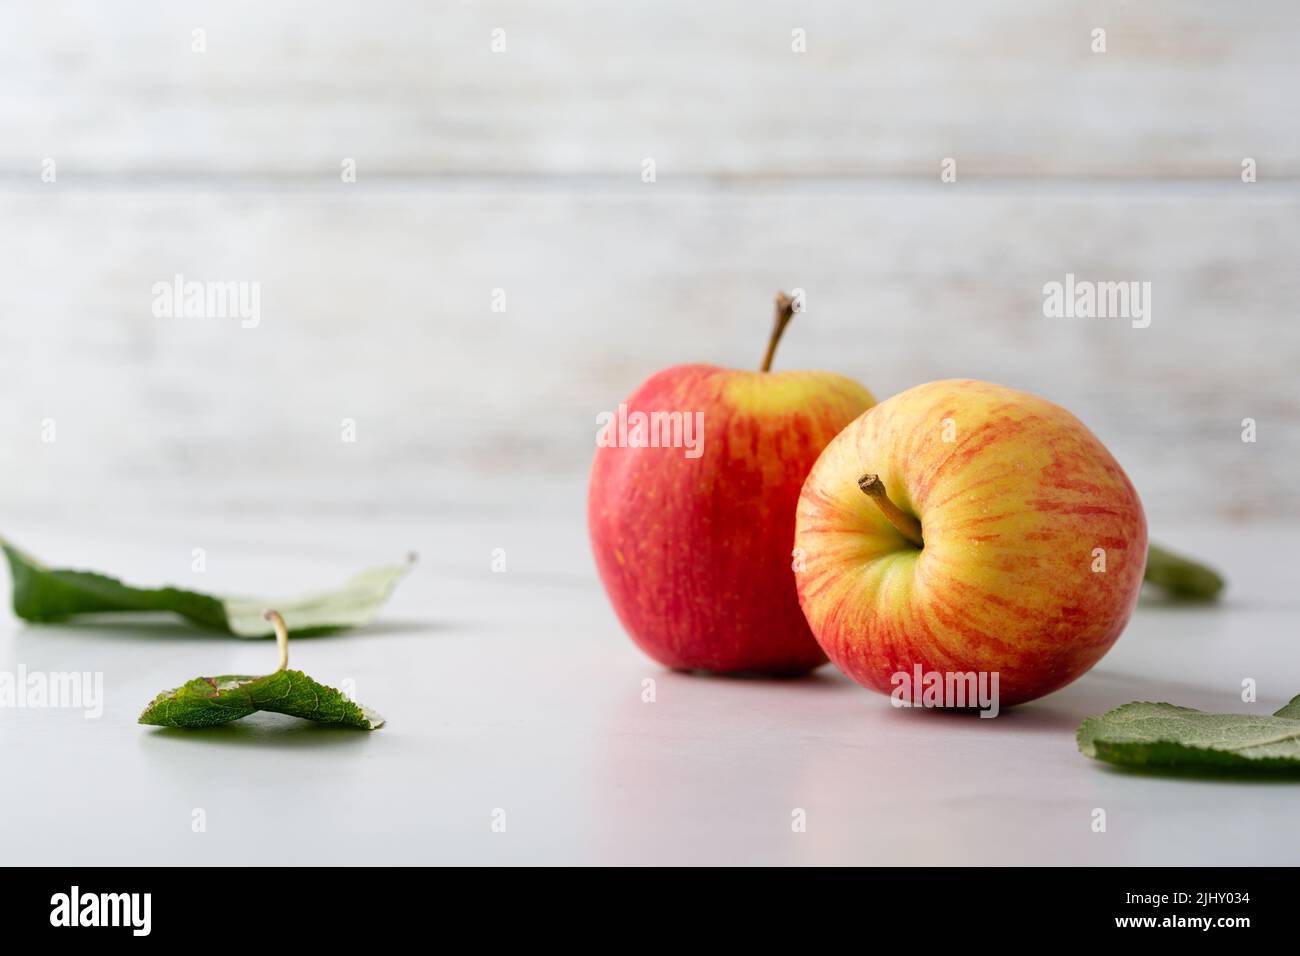 Two fresh organic apples on light surface harvest concept food Stock Photo